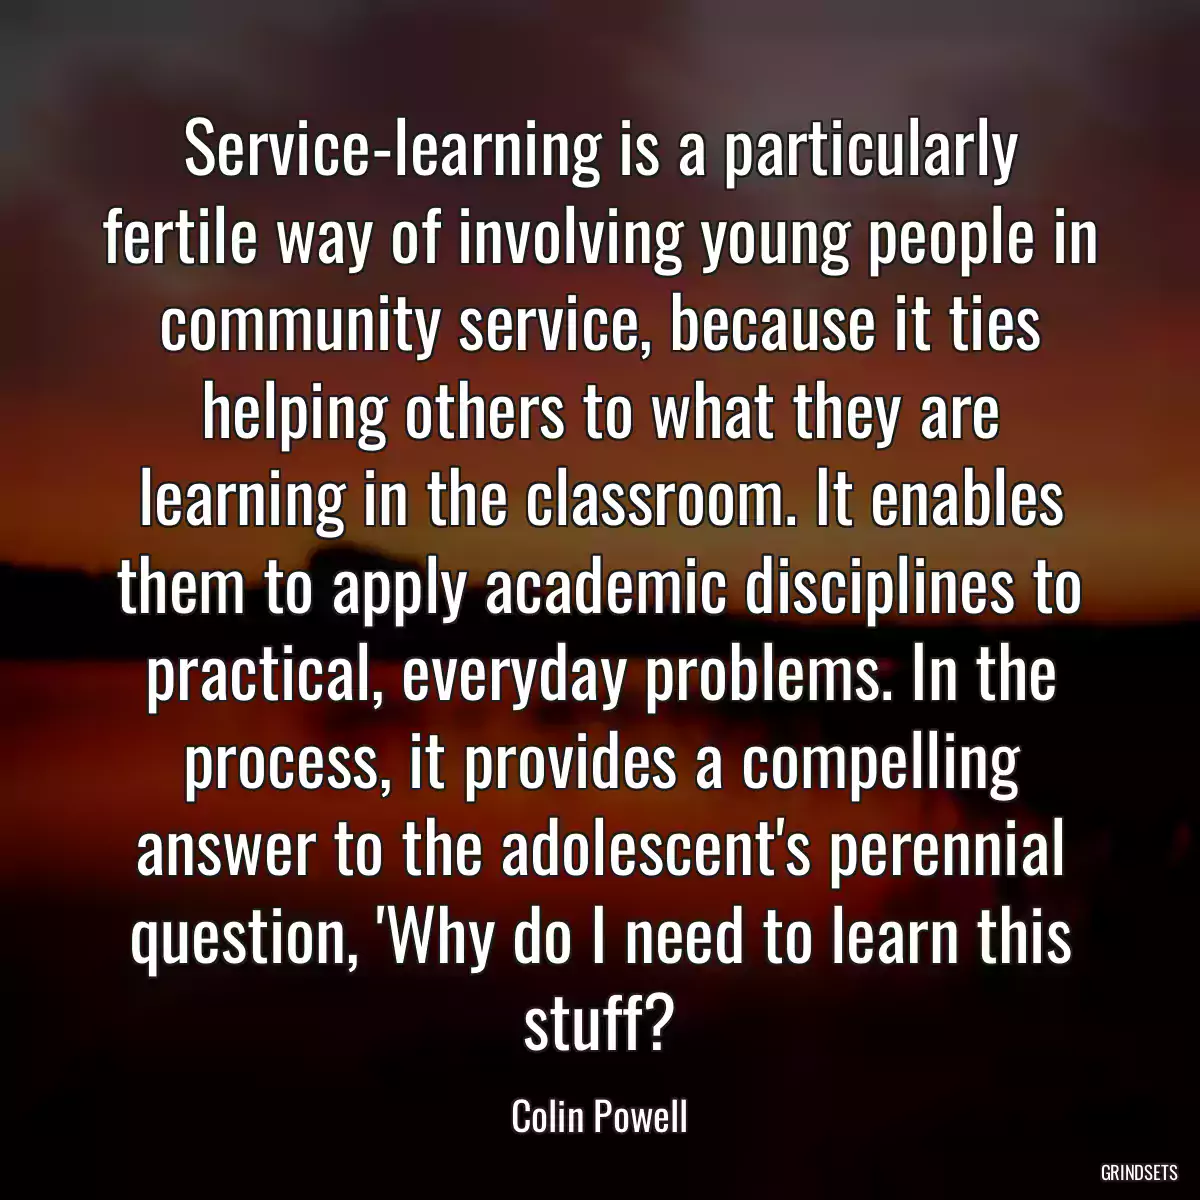 Service-learning is a particularly fertile way of involving young people in community service, because it ties helping others to what they are learning in the classroom. It enables them to apply academic disciplines to practical, everyday problems. In the process, it provides a compelling answer to the adolescent\'s perennial question, \'Why do I need to learn this stuff?